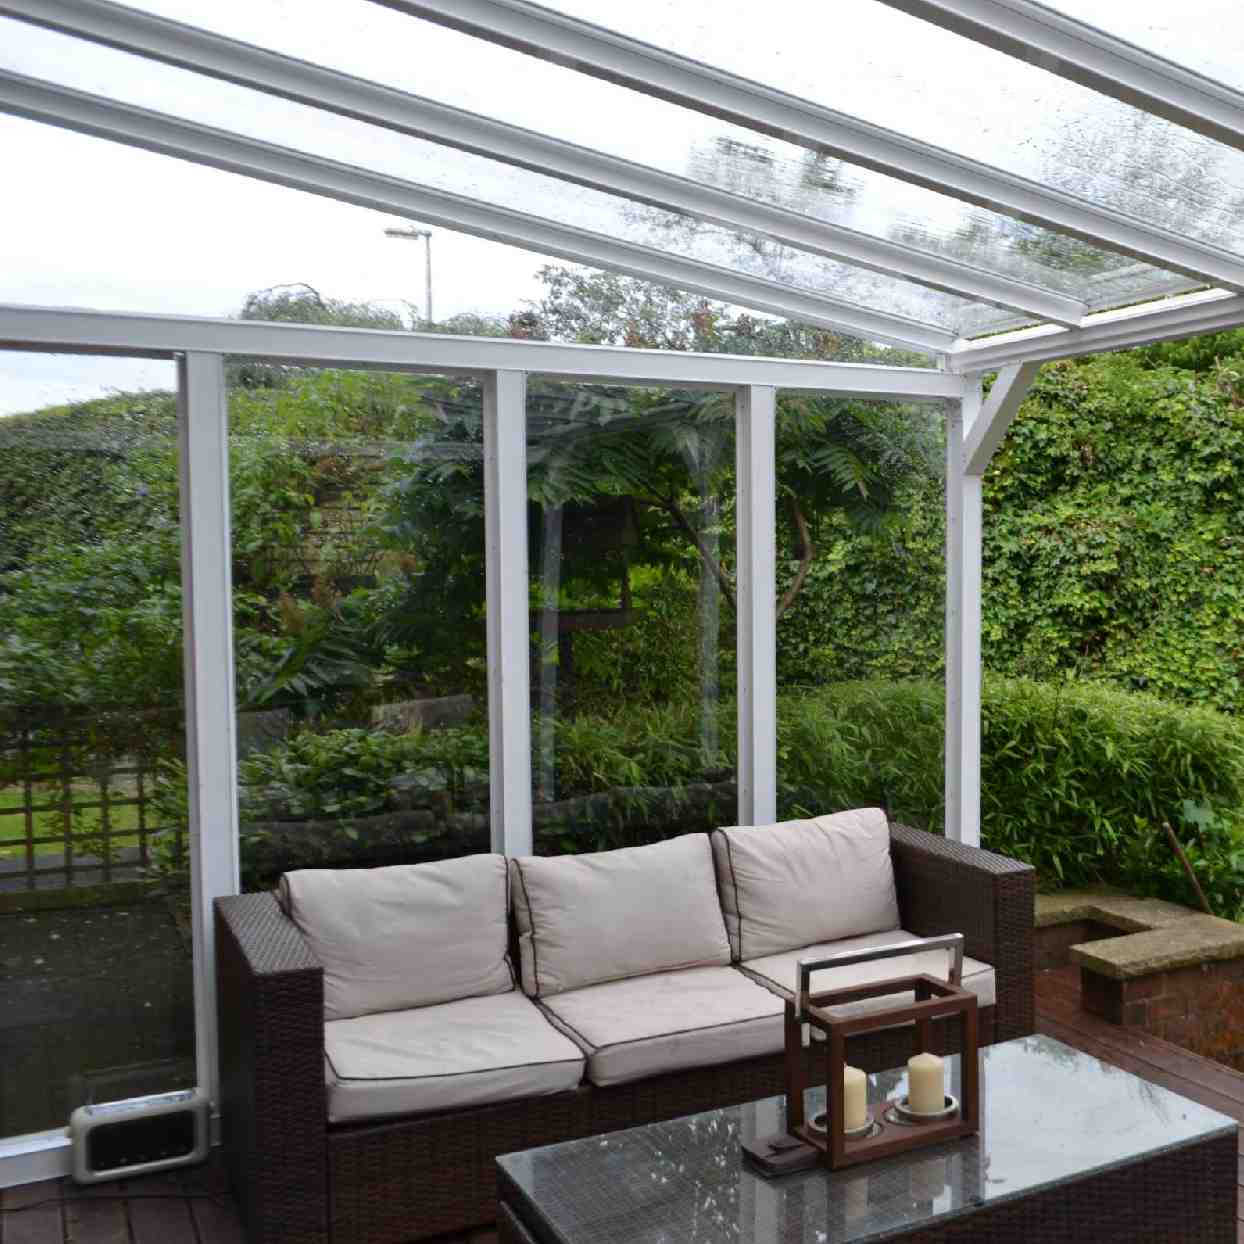 Buy Omega Verandah White with 16mm Polycarbonate Glazing - 9.1m (W) x 4.5m (P), (5) Supporting Posts online today